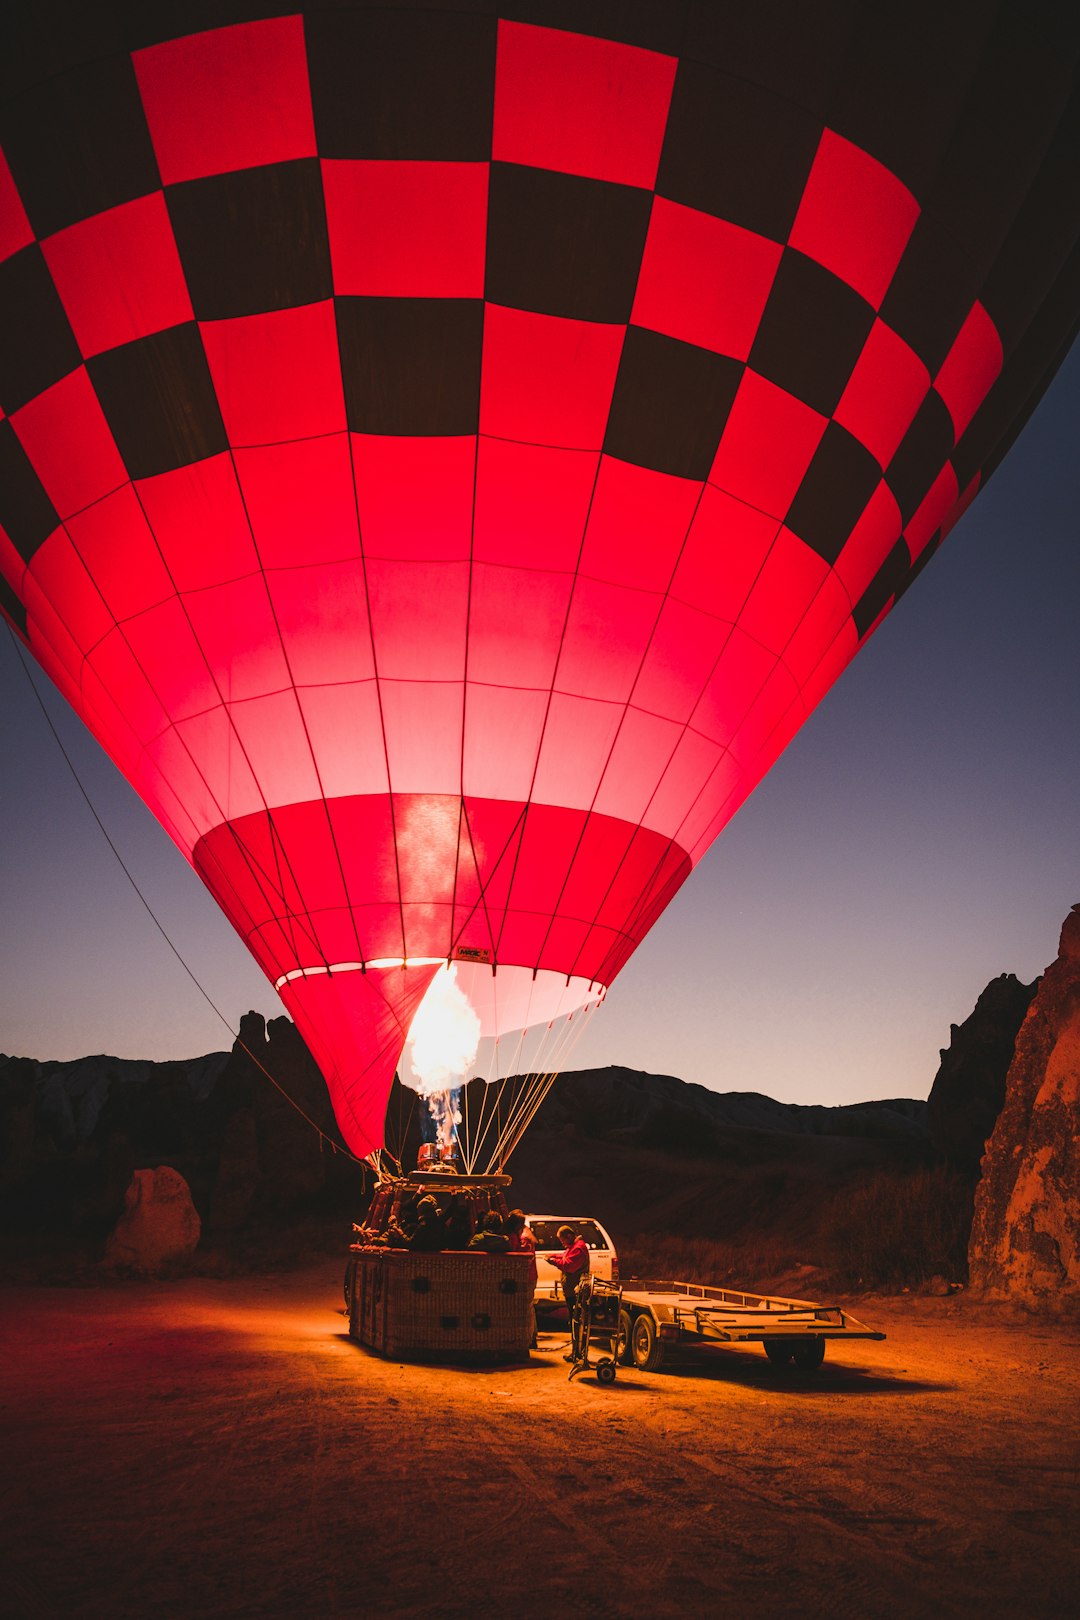 travelers stories about Hot air ballooning in Cappadocia Balloons ®, Turkey